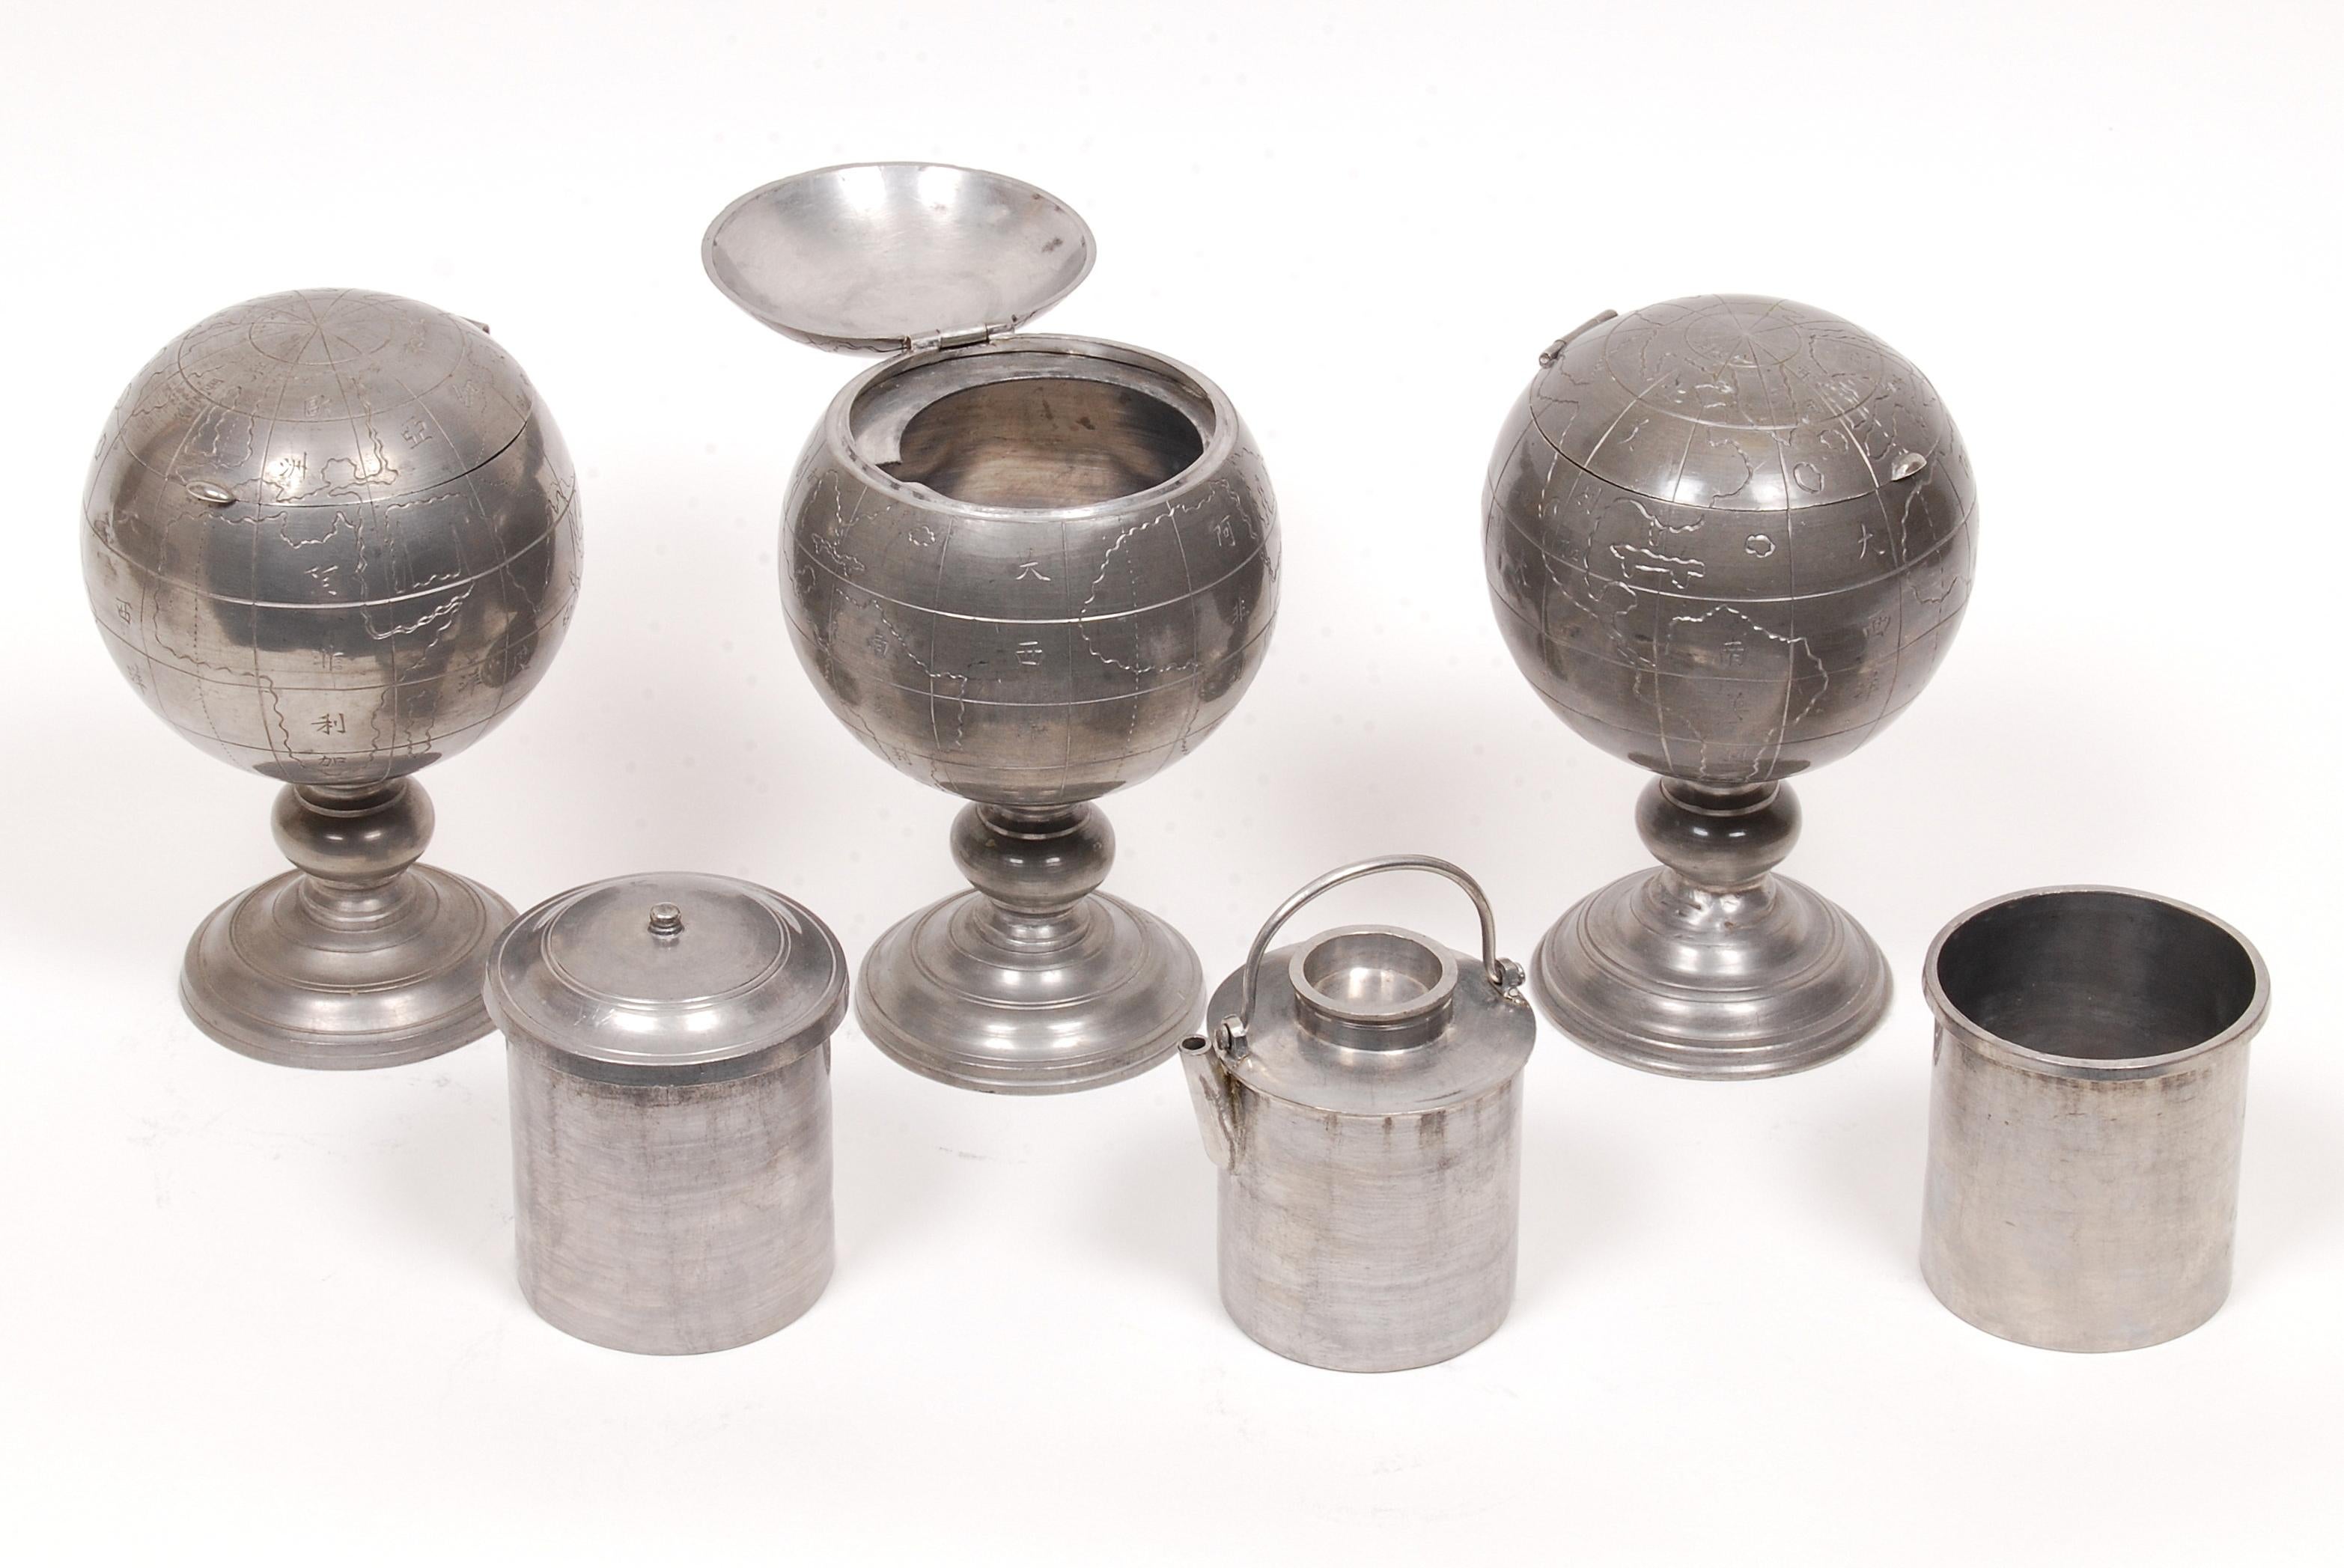 A set of three Chinese tea caddies in the form of a world globes. Includes engraved longitudes, latitudes, continents and oceans identified with Chinese characters. The pewter globe has a hinged lid and is set on a stepped circular base. The